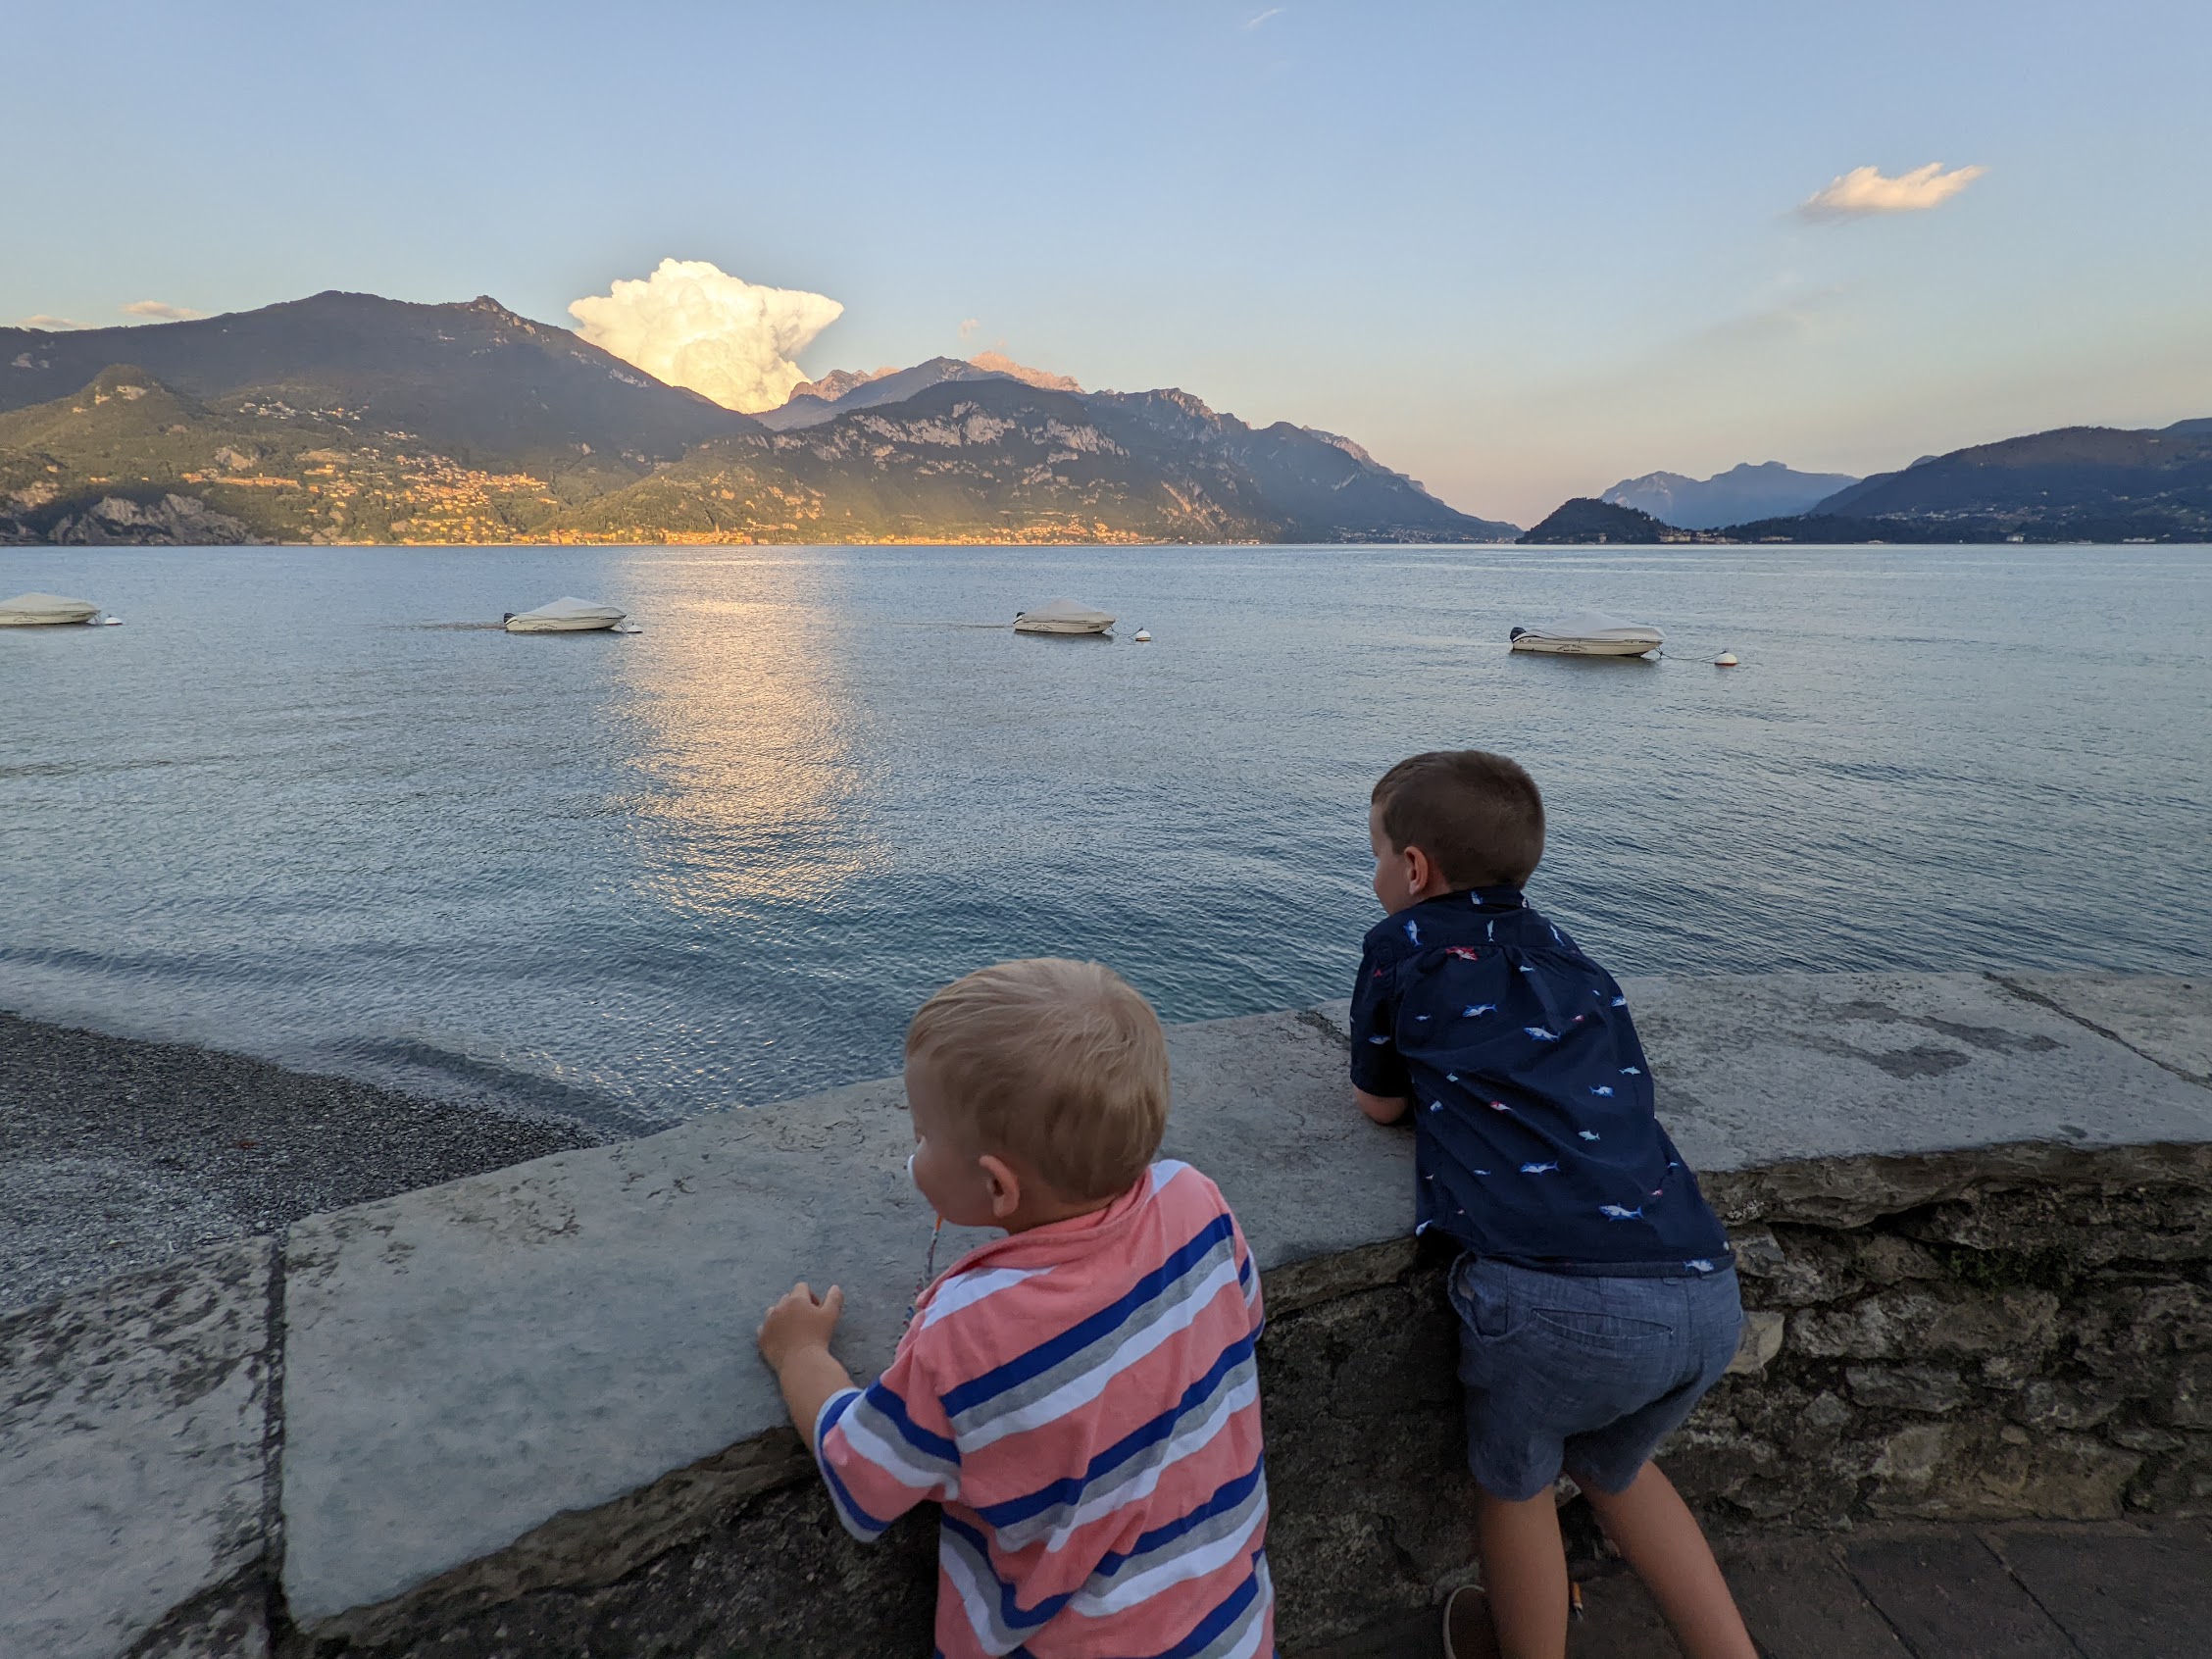 two boys looking at a body of water